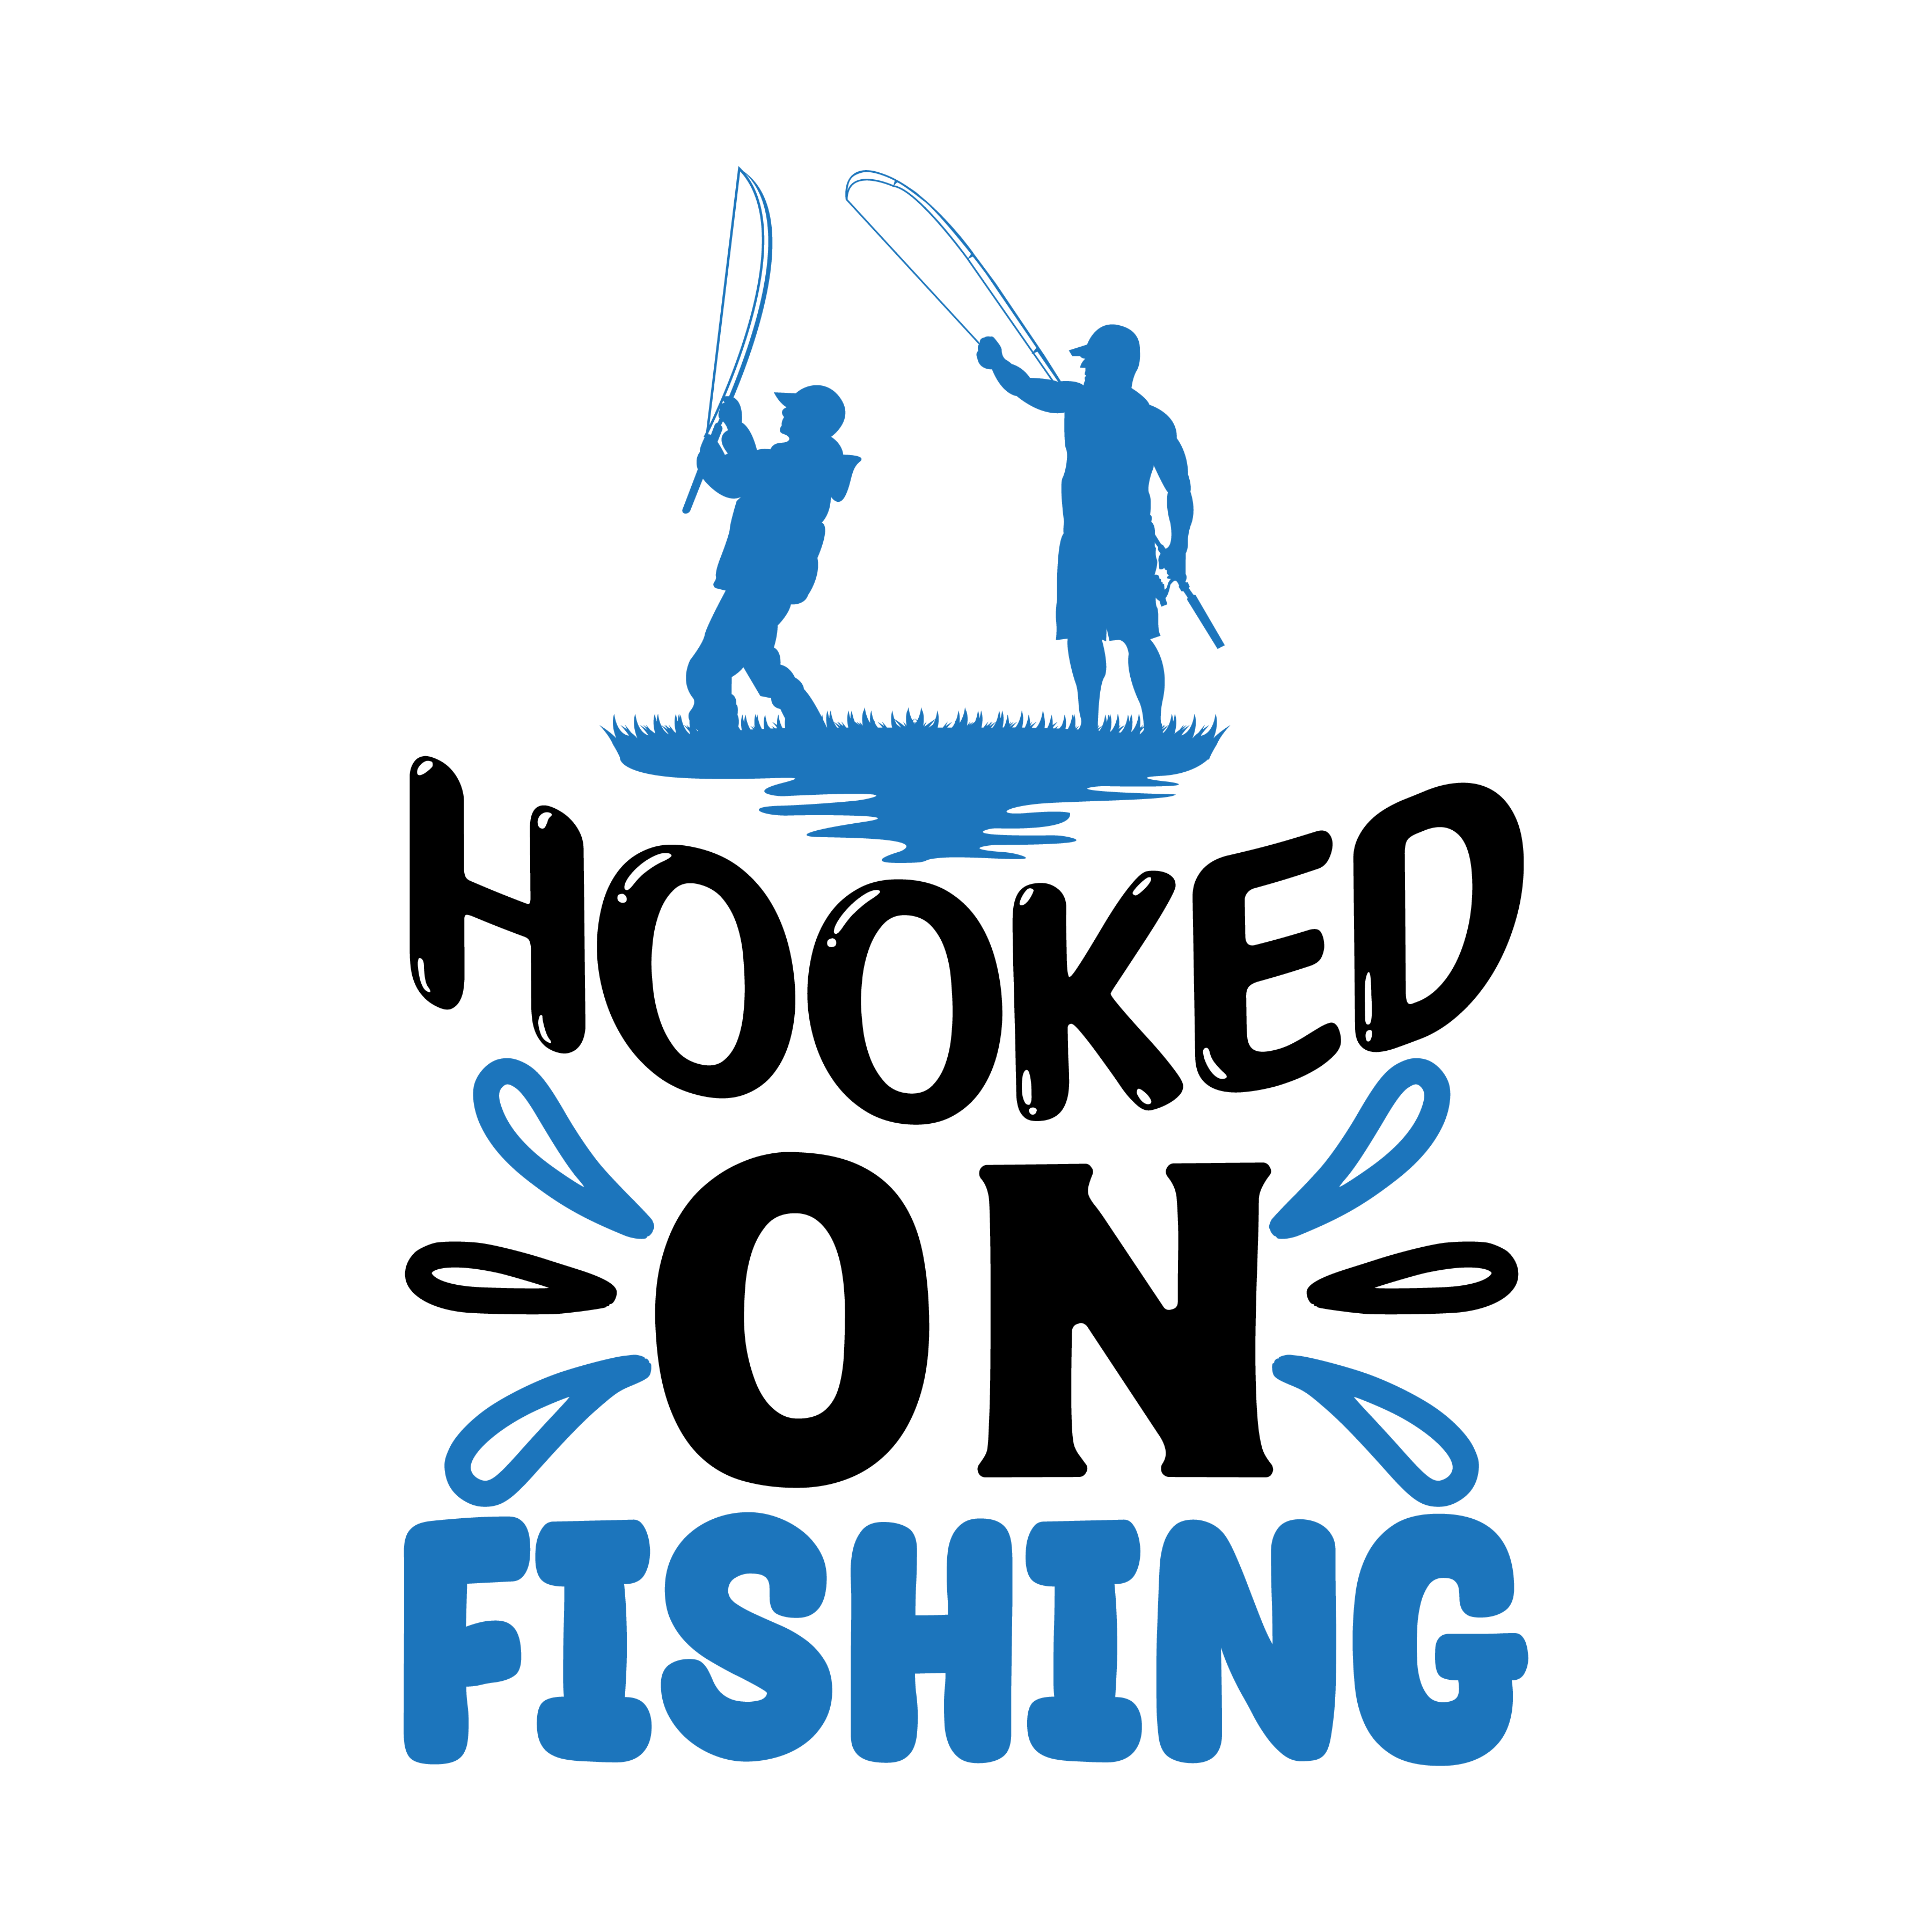 hooked on fishing, Fishing quotes, fishing sayings, Cricut designs, free, clip art, svg file, template, pattern, stencil, silhouette, cut file, design space, short, funny, shirt, cup, DIY crafts and projects, embroidery